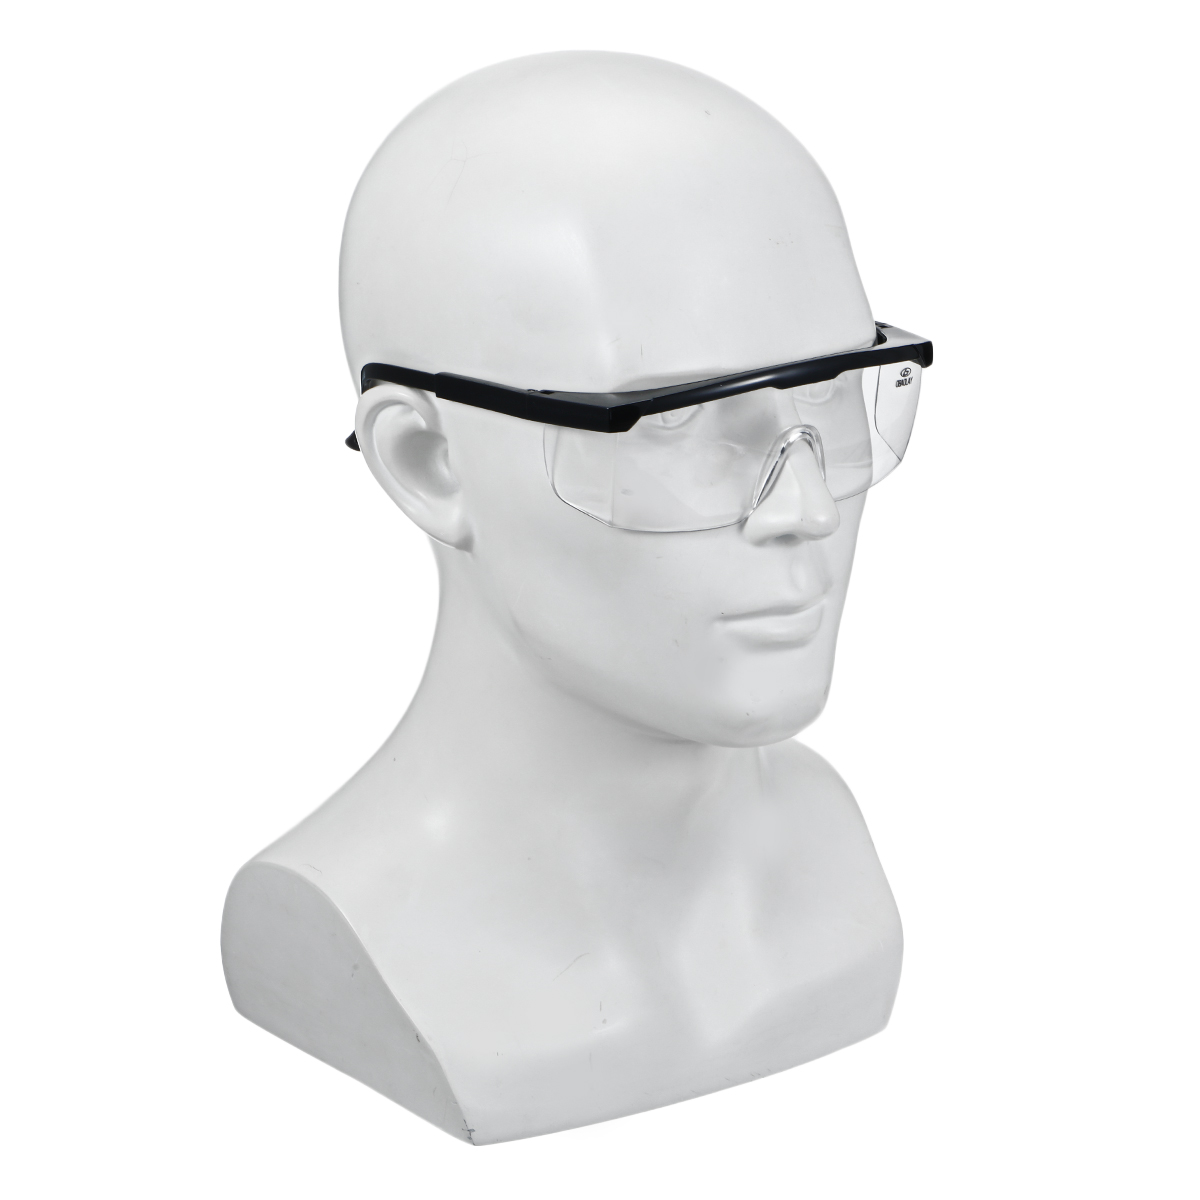 1PCS-Safety-Glasses-Work-Goggles-Eyewear-Protective-Industrial-Lab-Dust-Droplets-1889895-12